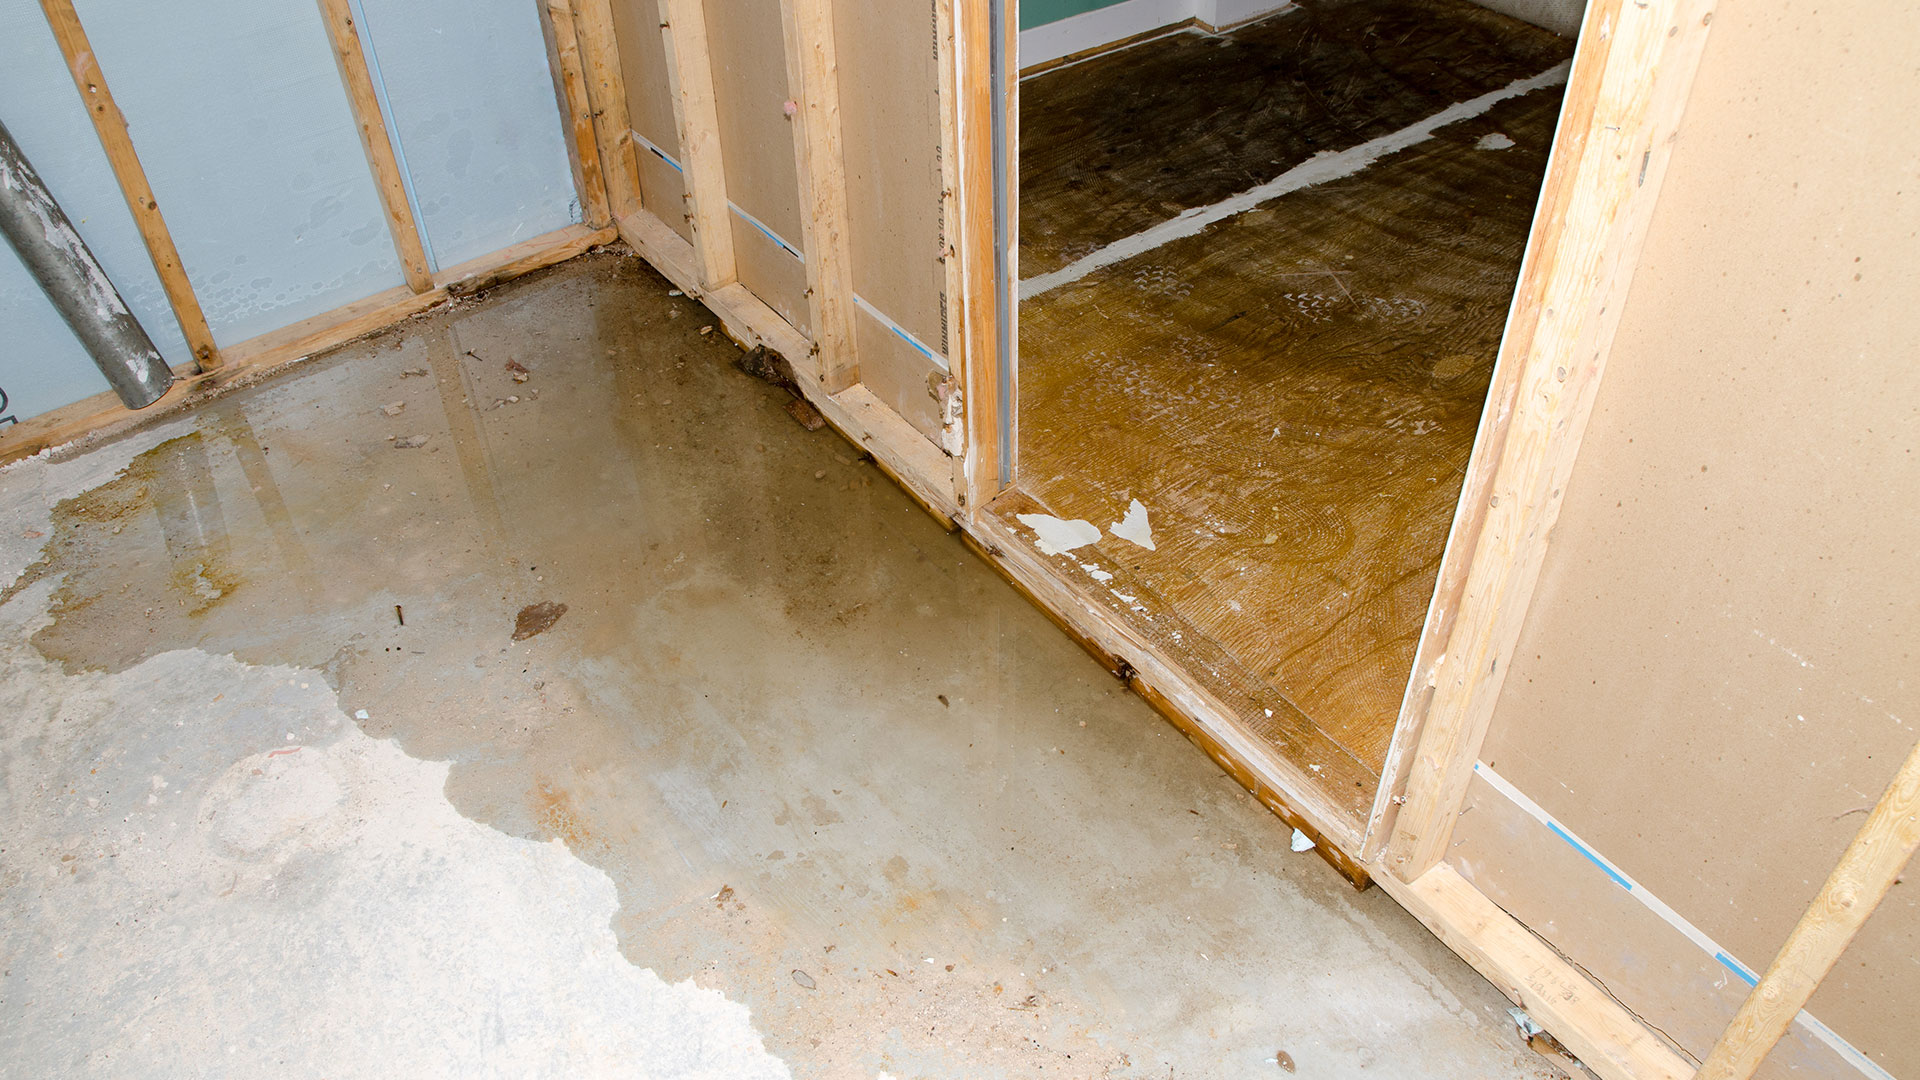 Sewage Leaking and Damage in Home